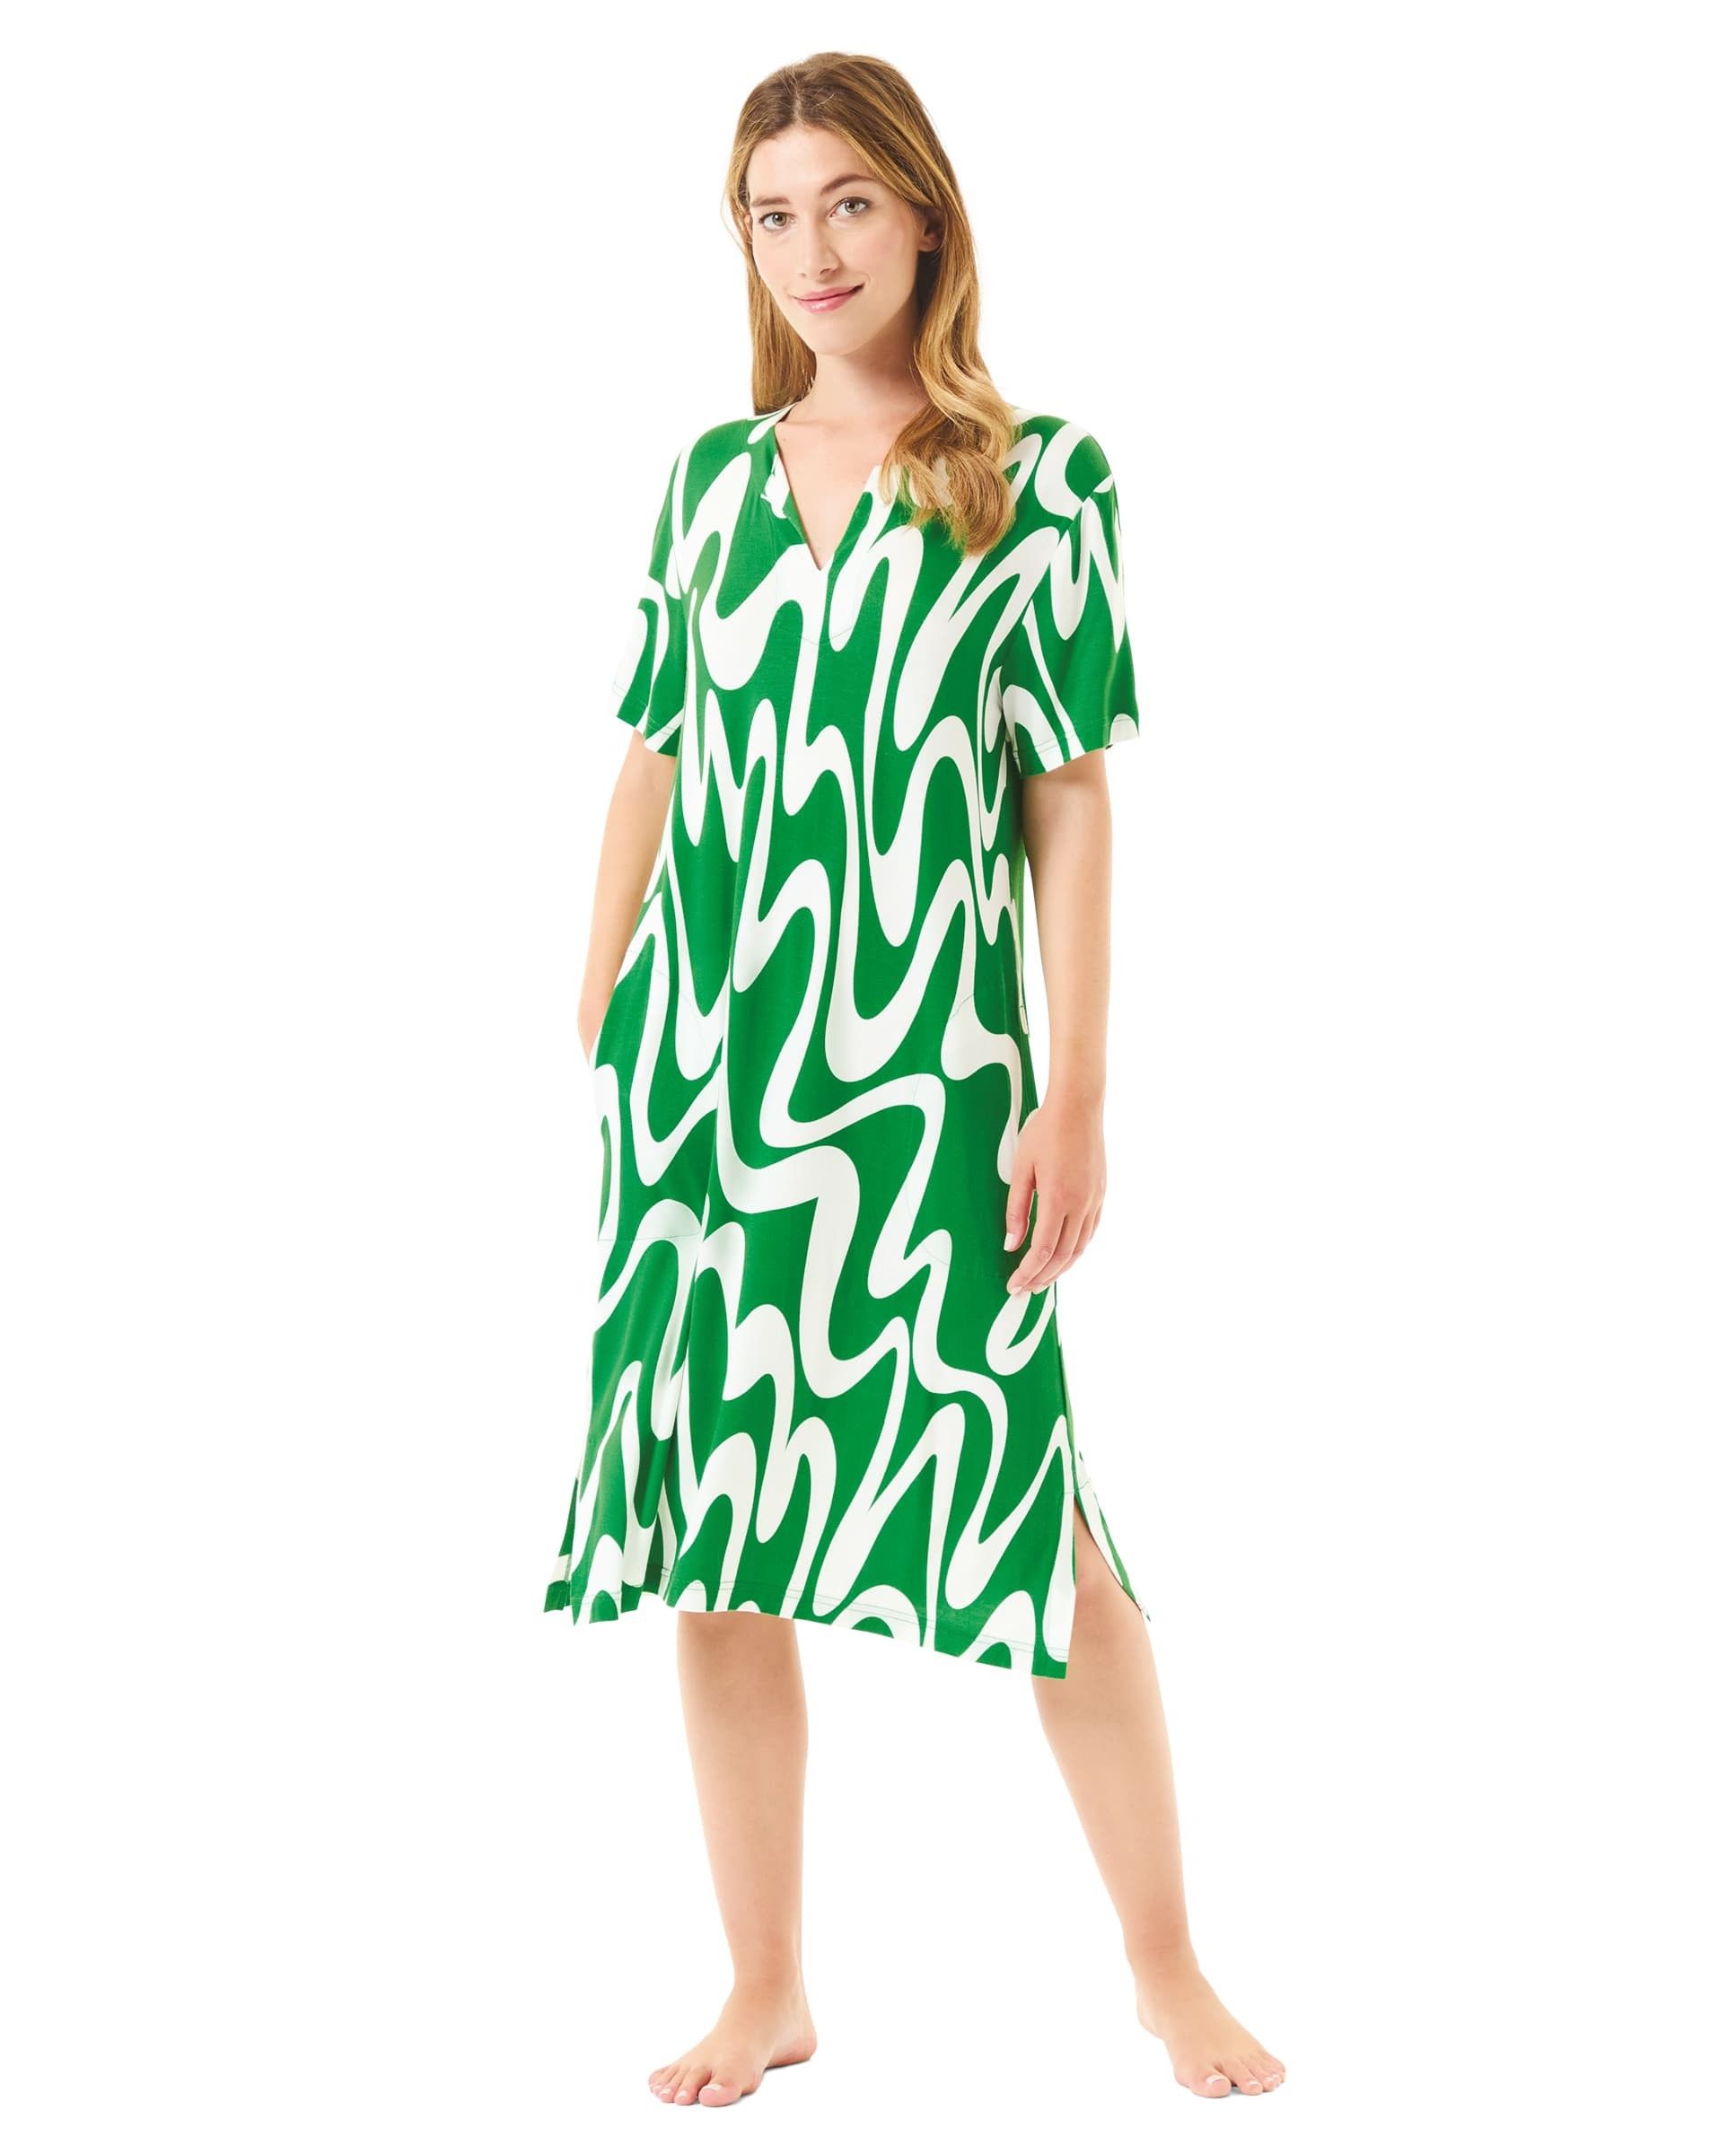 Woman wearing summer swim dress with green wave print and short sleeves